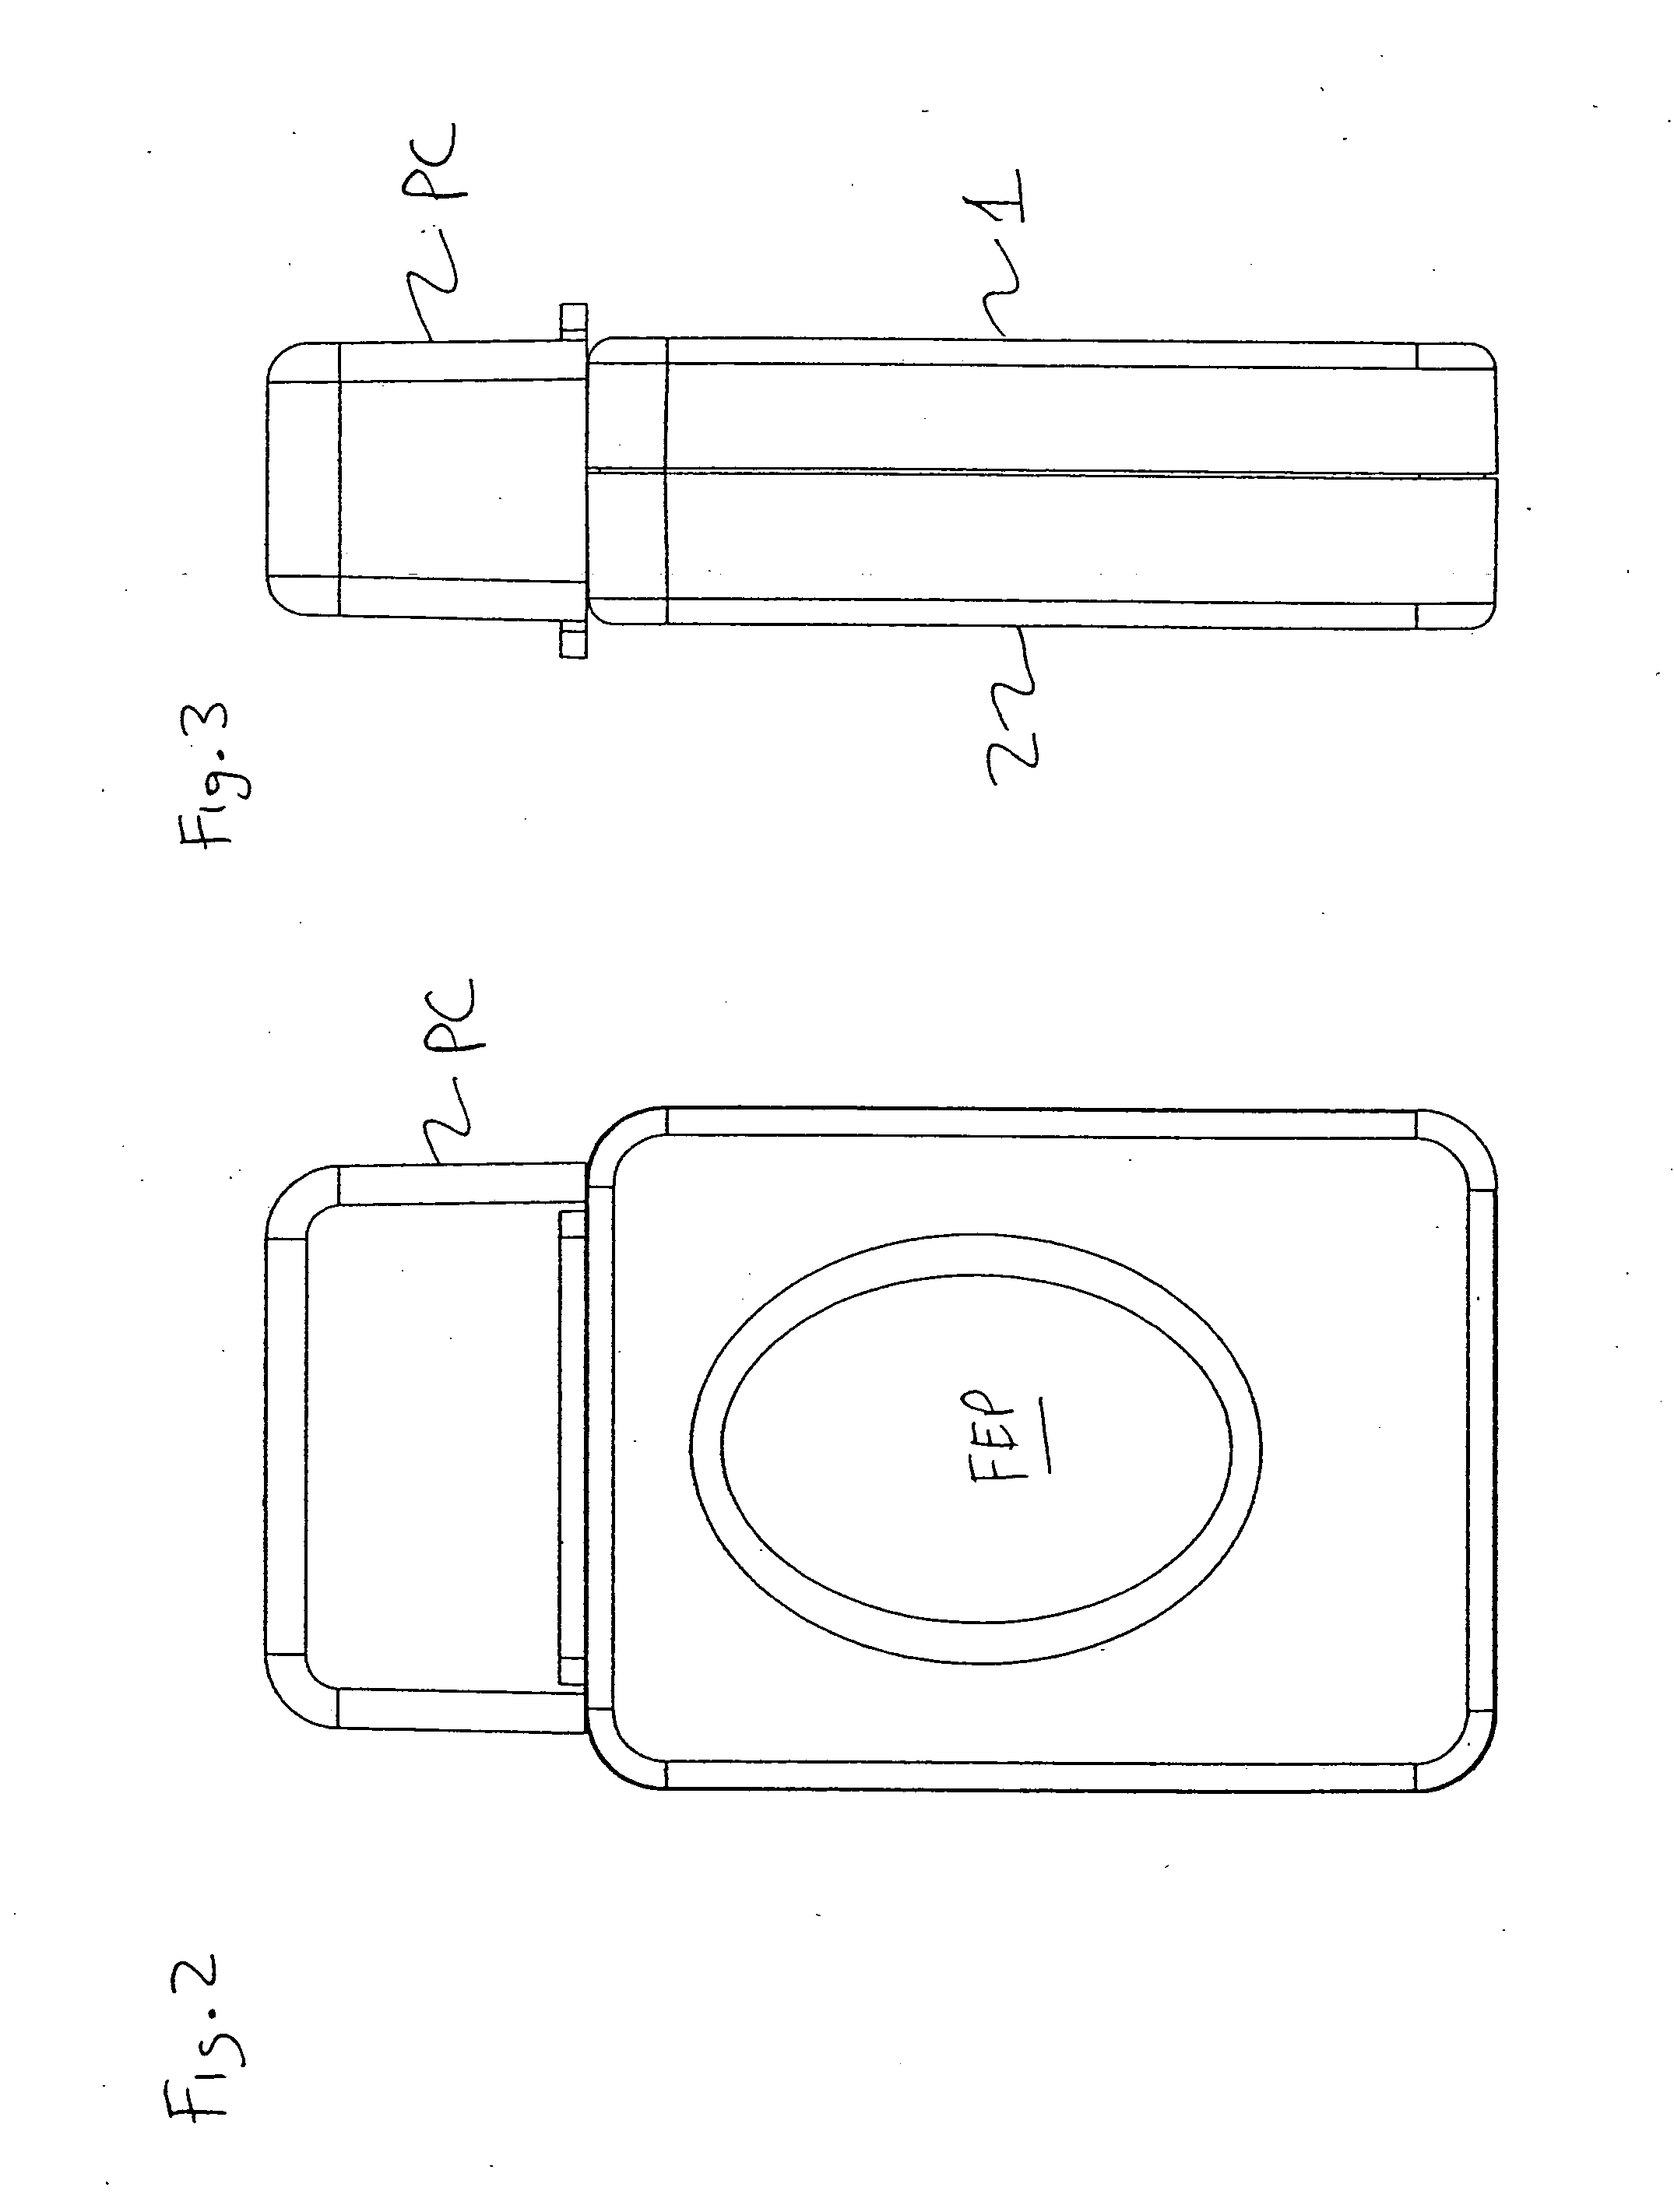 Disposable/single-use blade lancet device and method